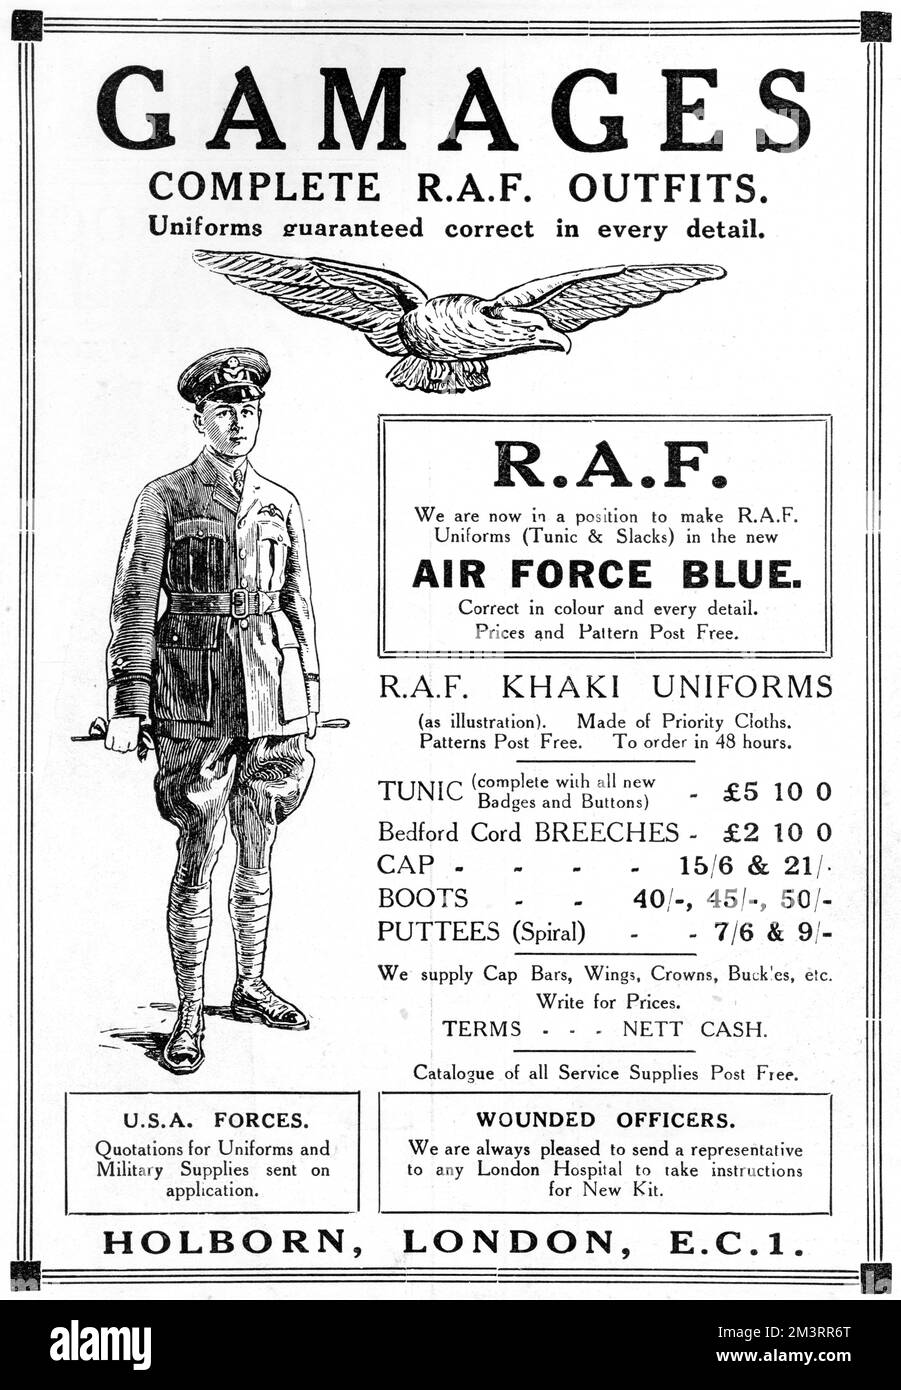 Advertisement for Royal Air Force uniforms in air force blue available from Holborn department store, Gamages.  The full uniform is on offer from tunic and breeches to cap bars, wings and buckles.  They will even send representatives to any London Hospital in order to take instructions for new kit!     Date: 1918 Stock Photo